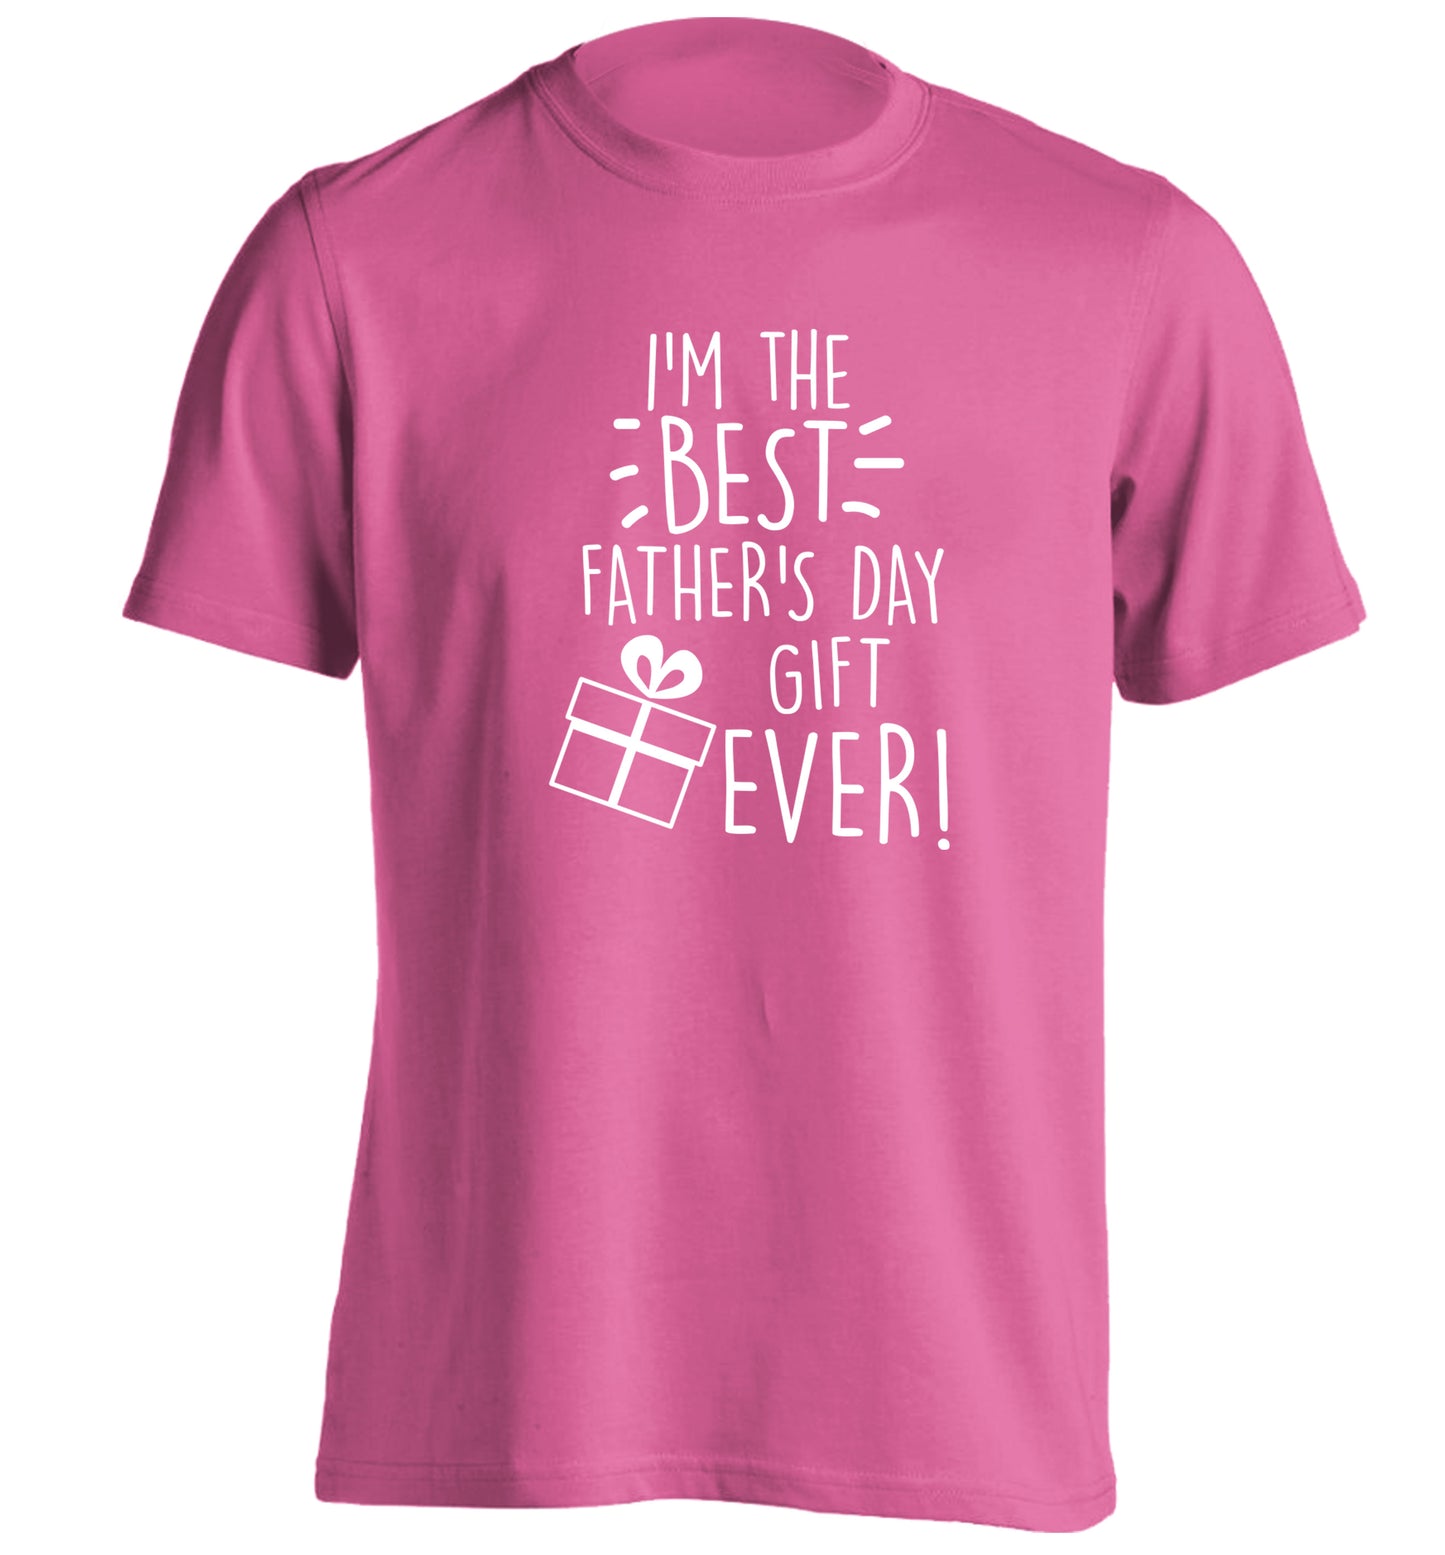 I'm the BEST father's day gift ever! adults unisex pink Tshirt 2XL